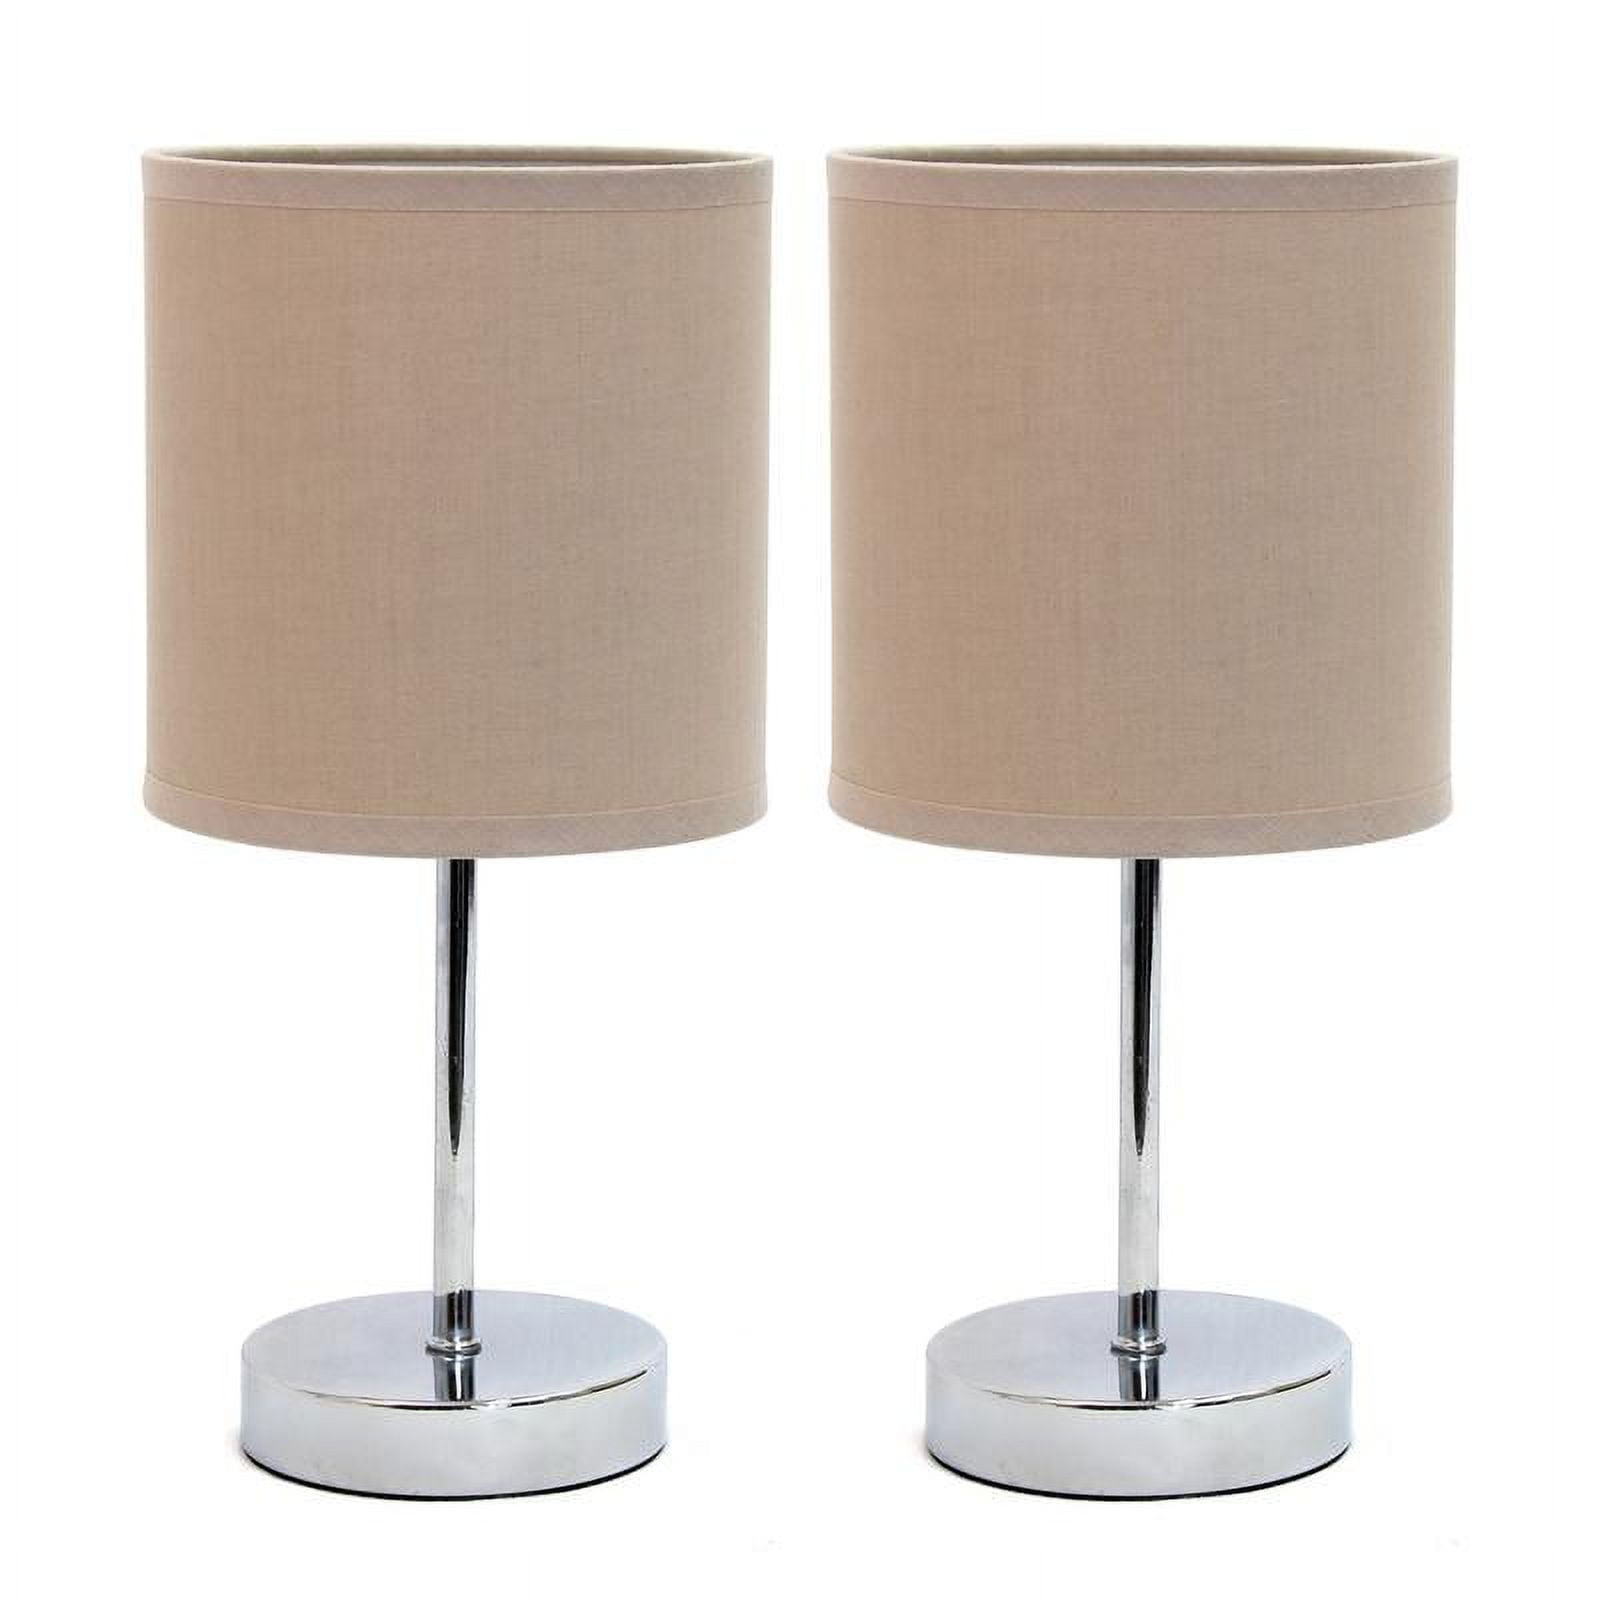 Picture of Simple Designs Chrome Mini Basic Table Lamp with Fabric Shade 2 Pack Set